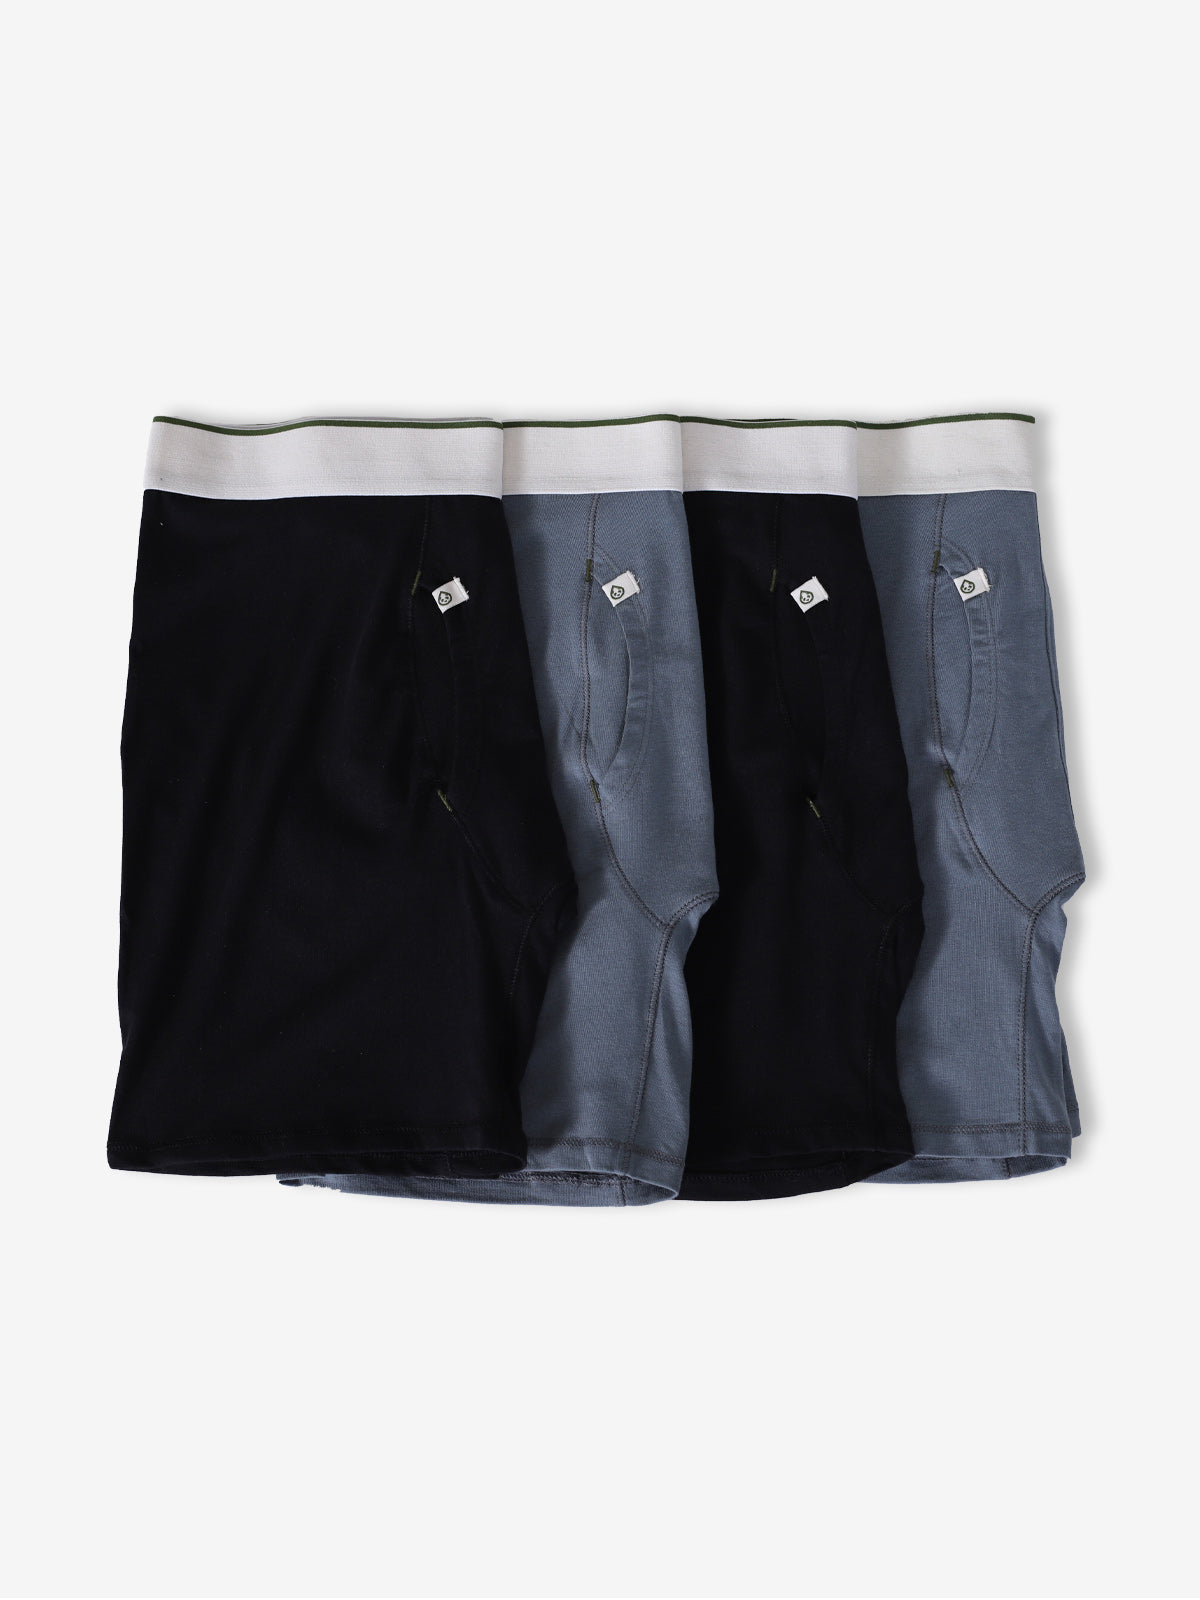 BamBare Boxer Brief 4 Pack (Black/Storm)